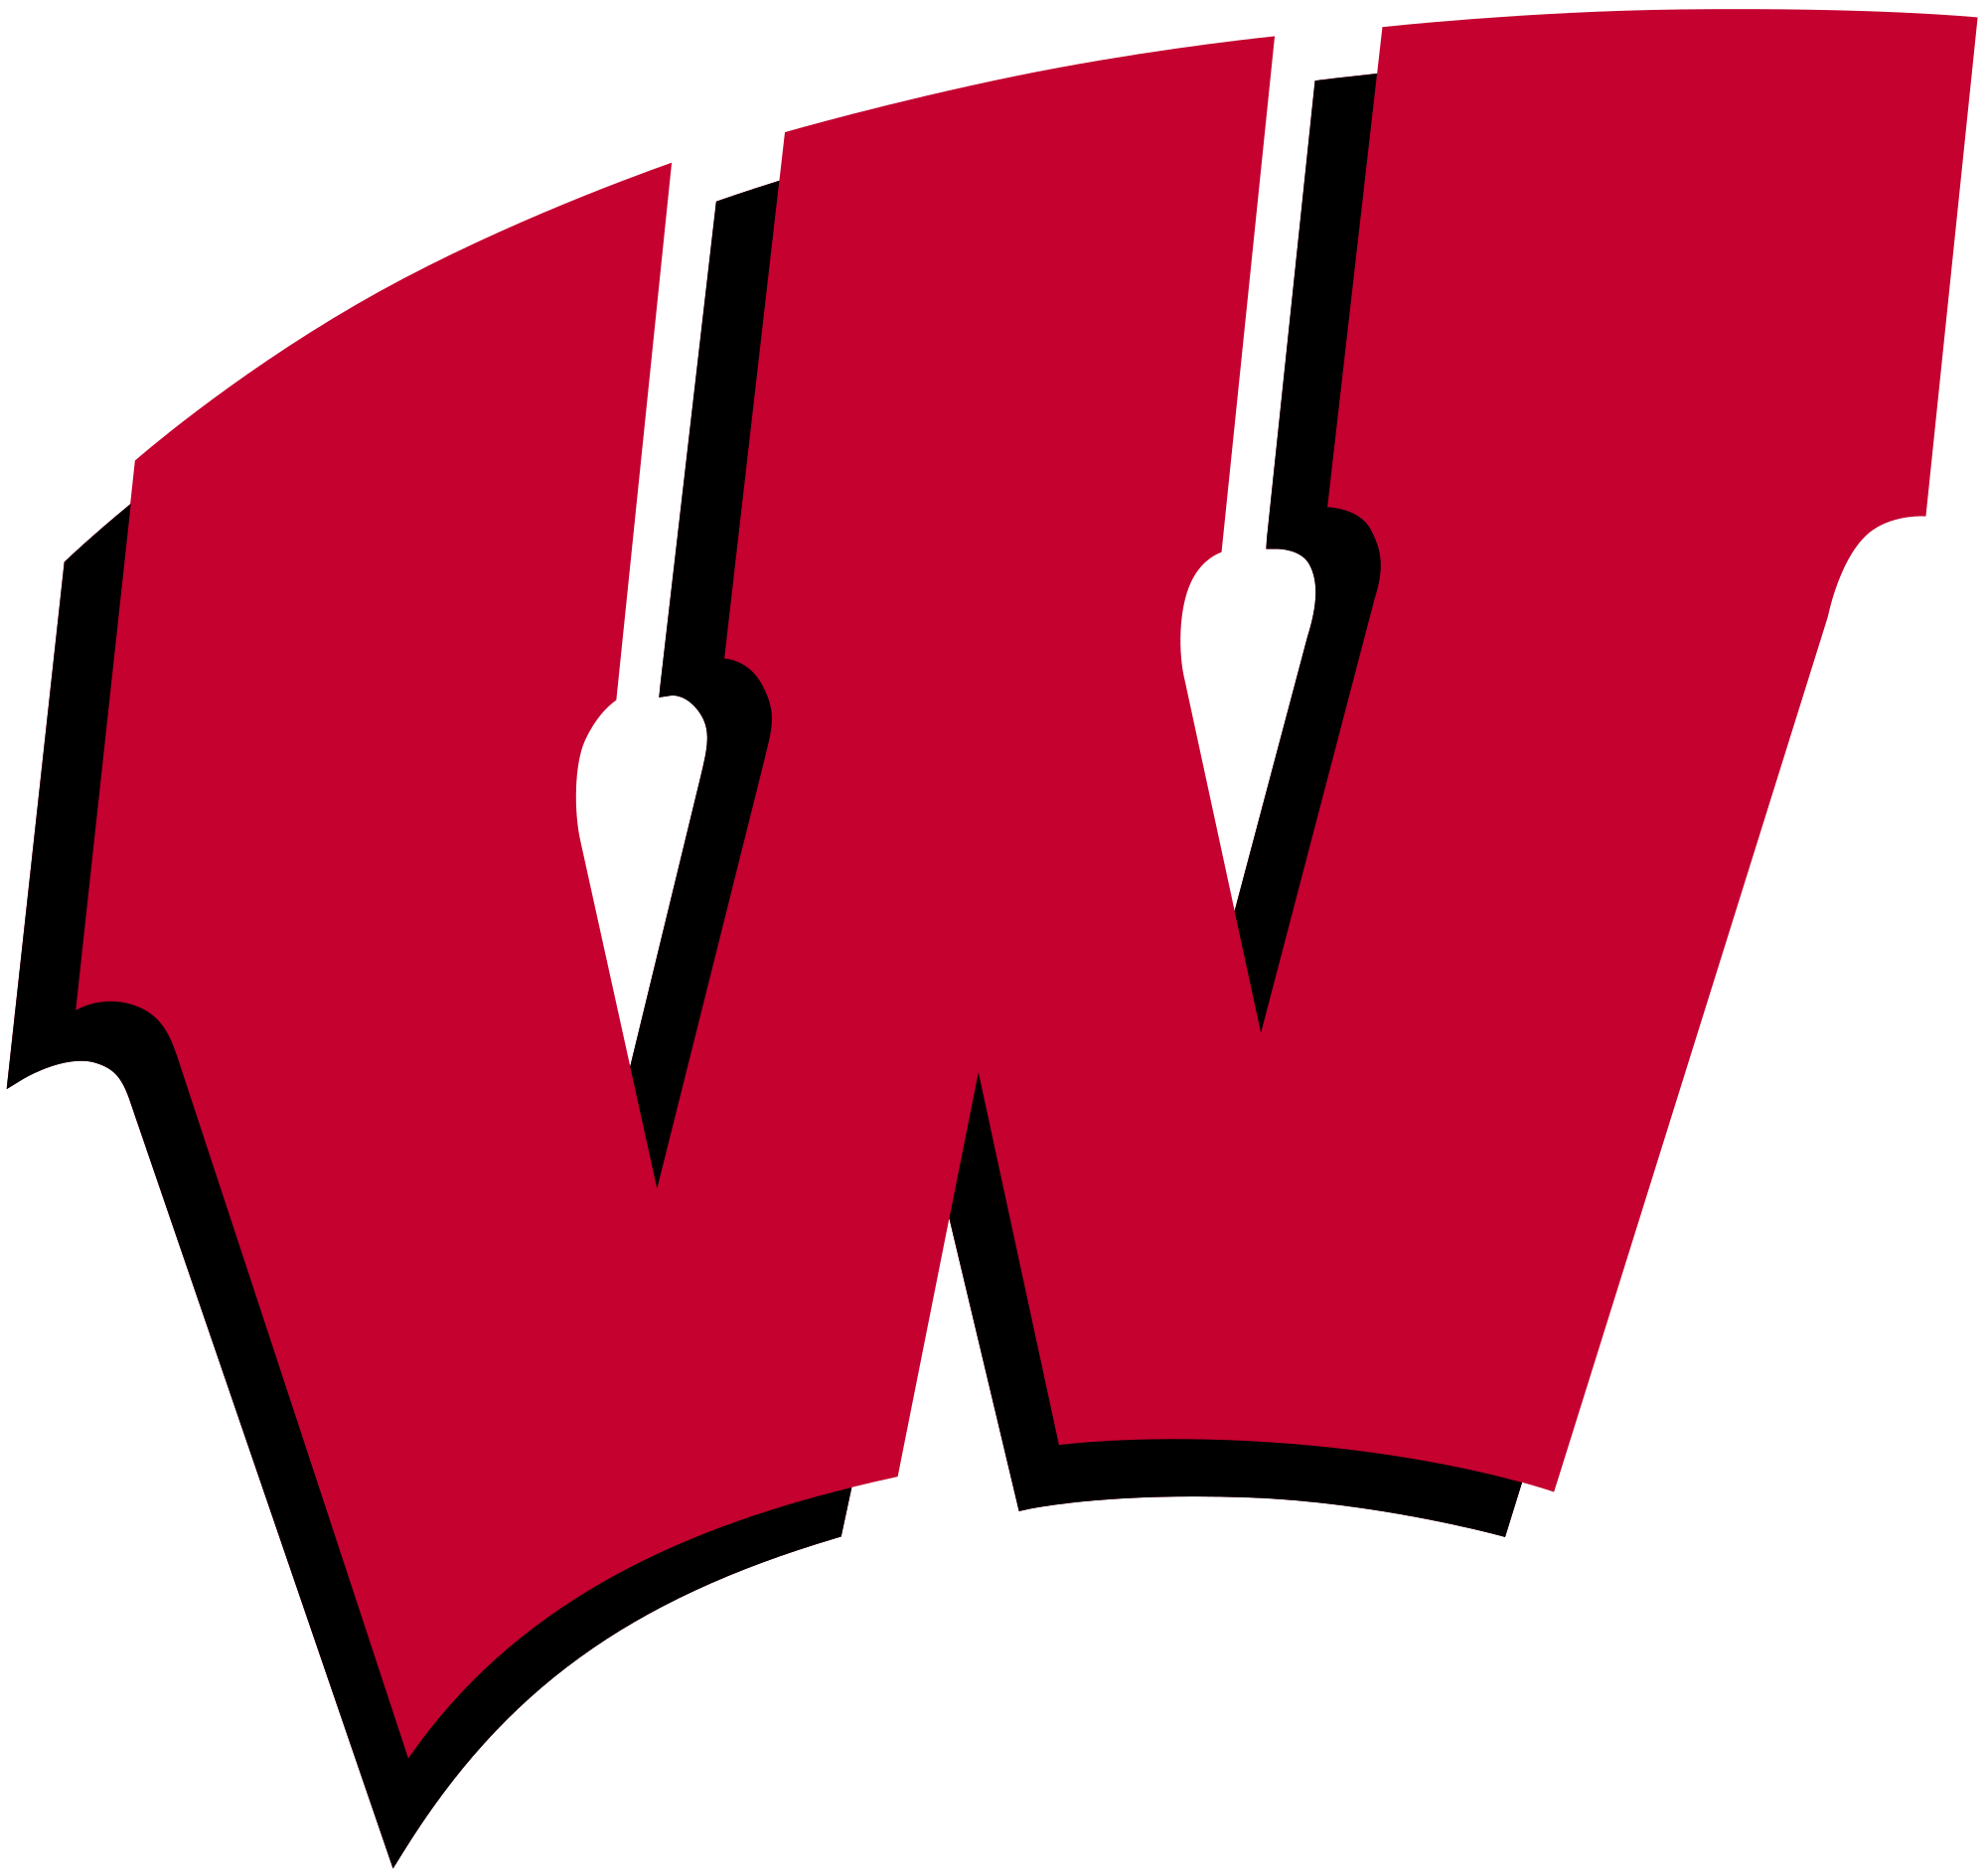 Badgers Logo - File:Wisconsin Badgers logo.svg - Wikimedia Commons